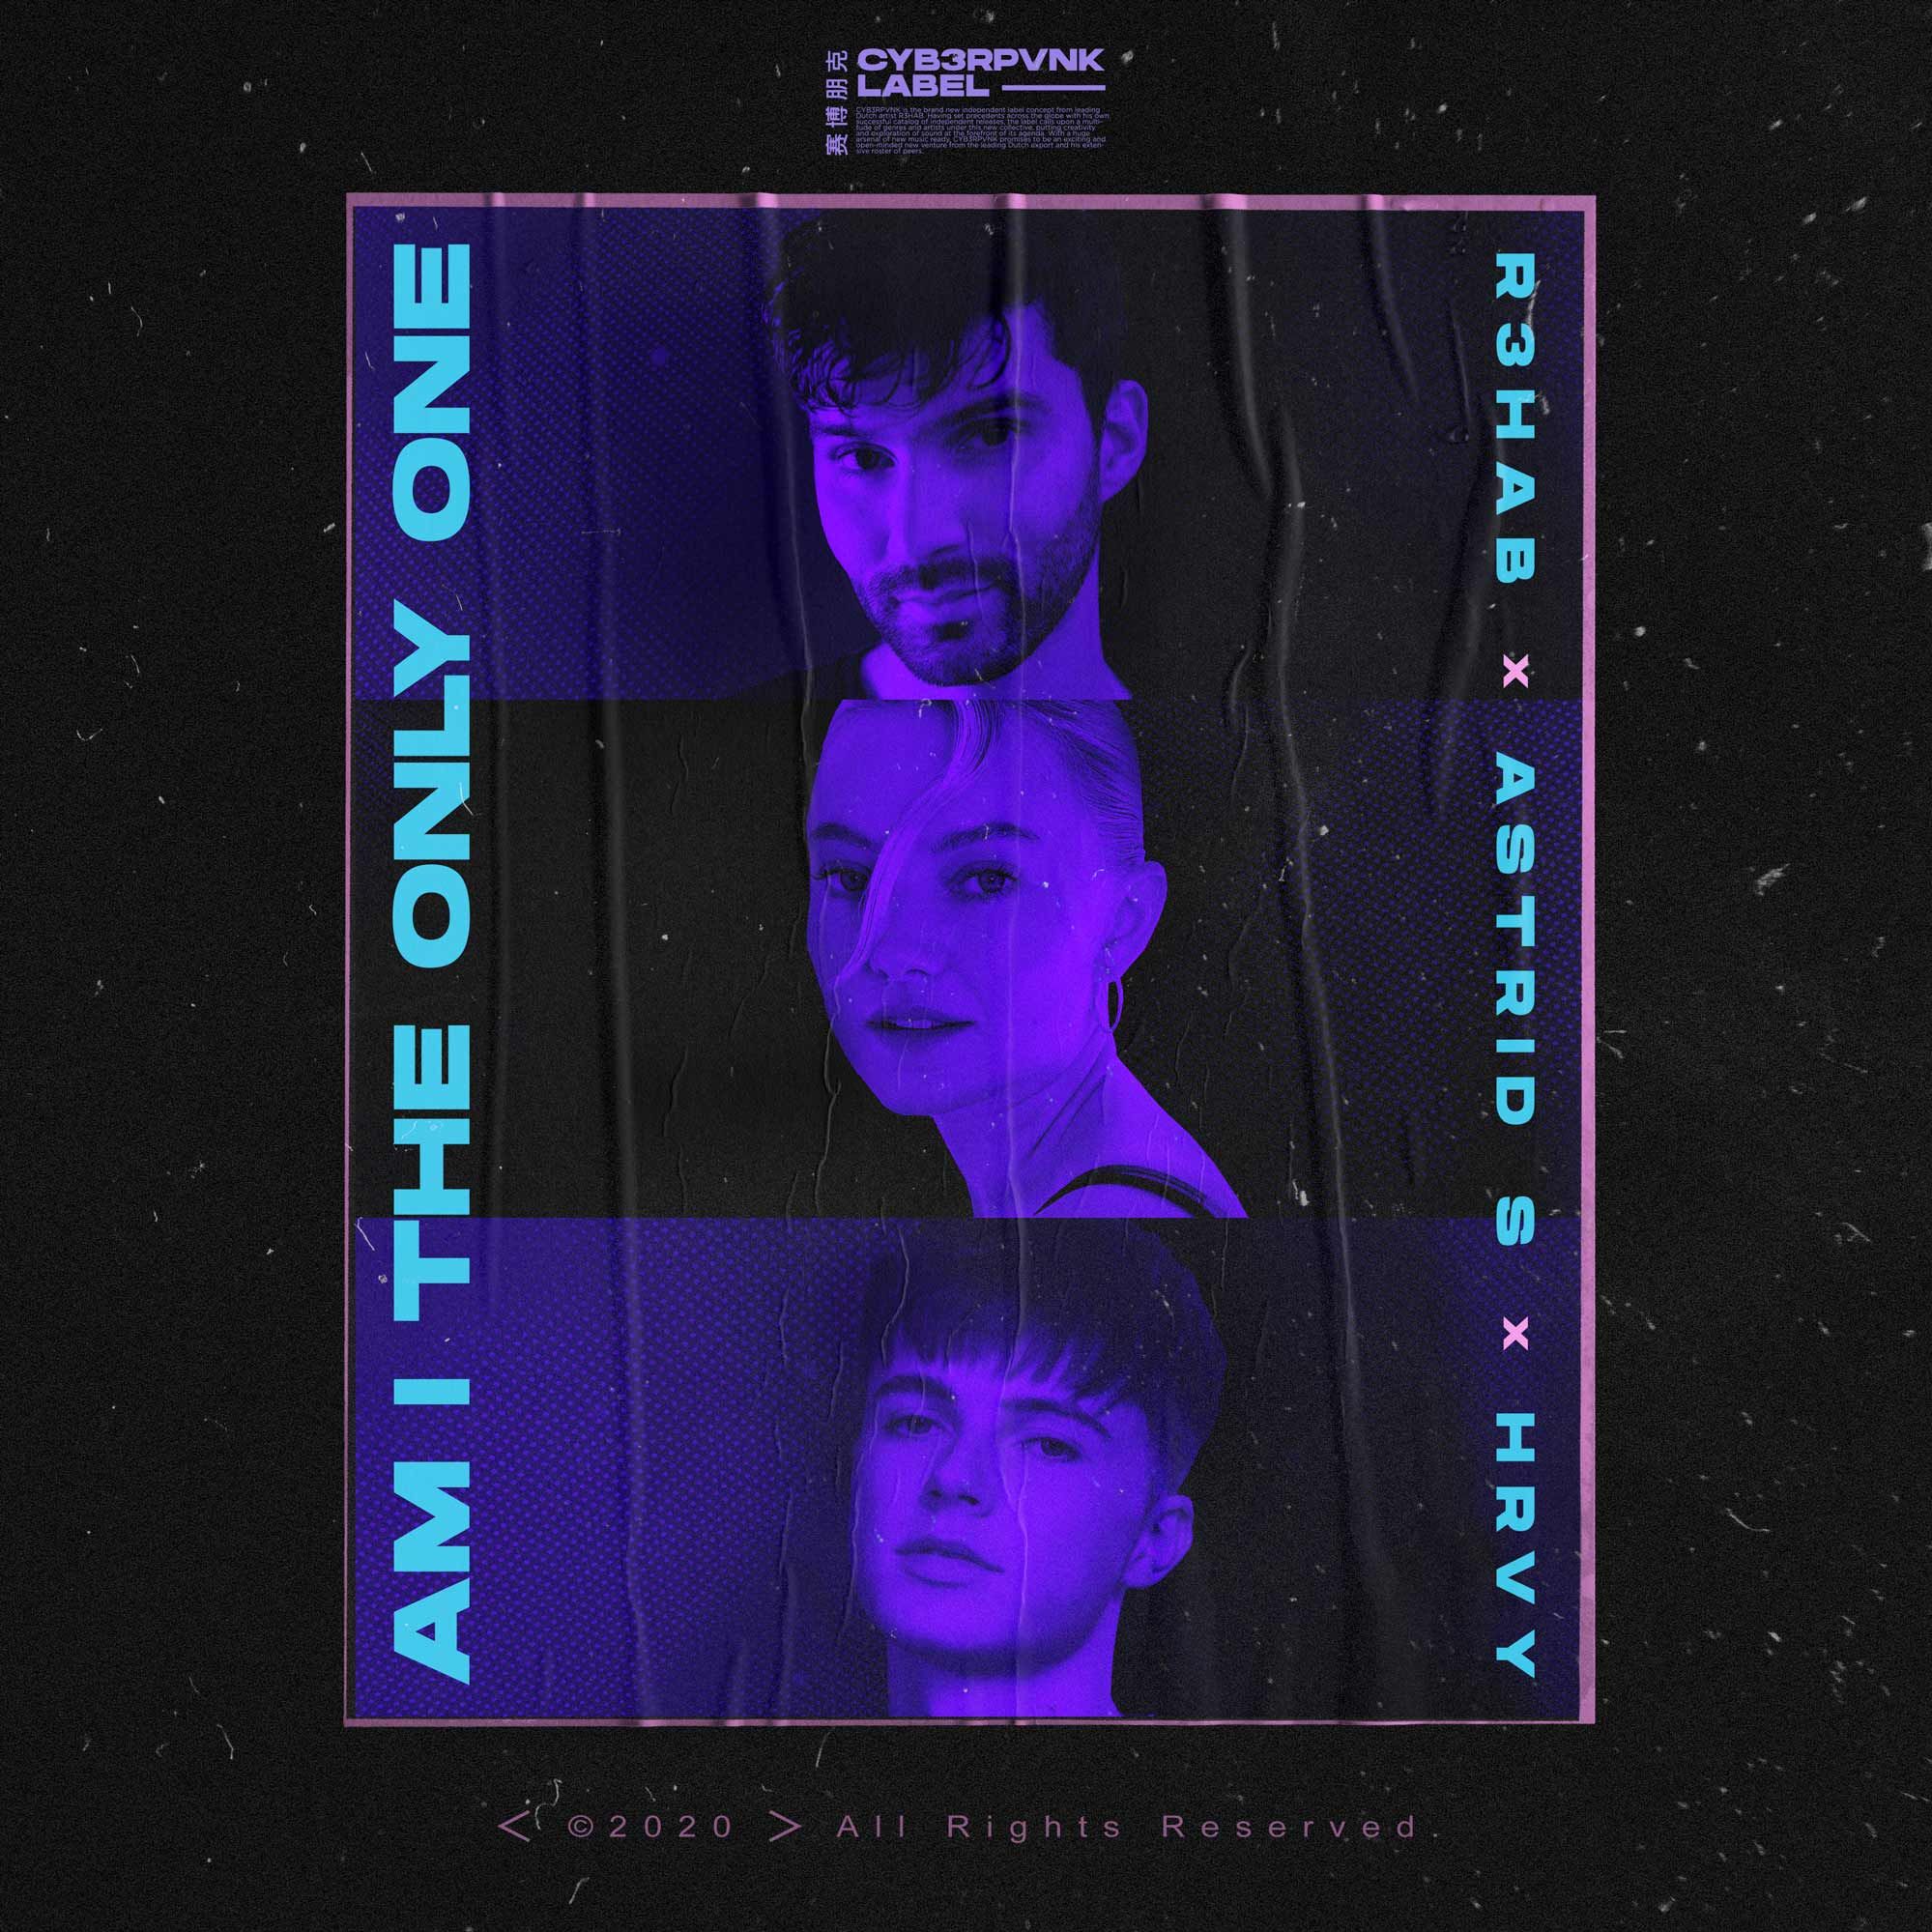 R3HAB x Astrid S x HRVY - Am I The Only One